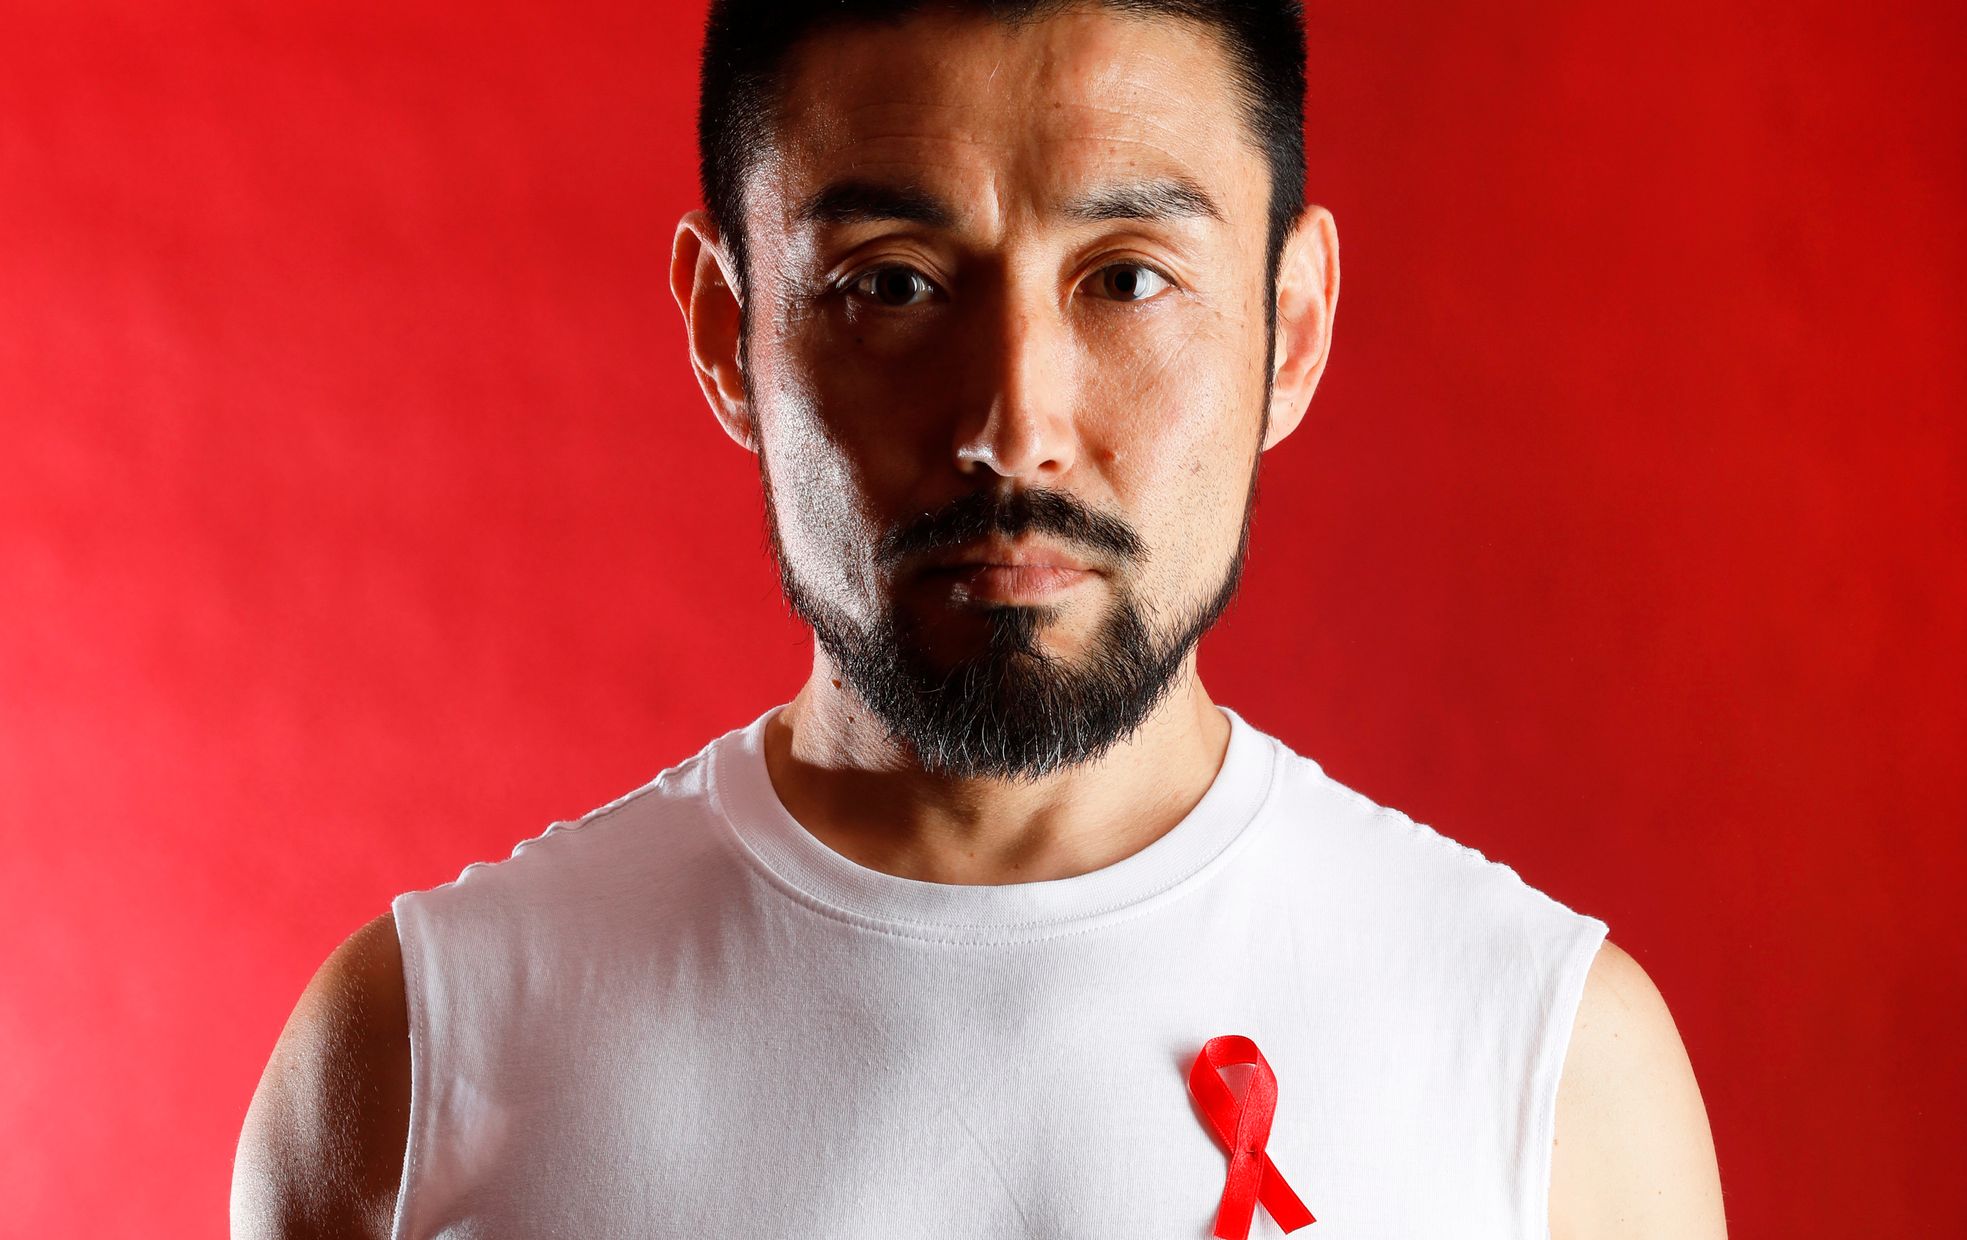 ‘People still use clean or dirty to describe HIV status’: challenging stigma around HIV